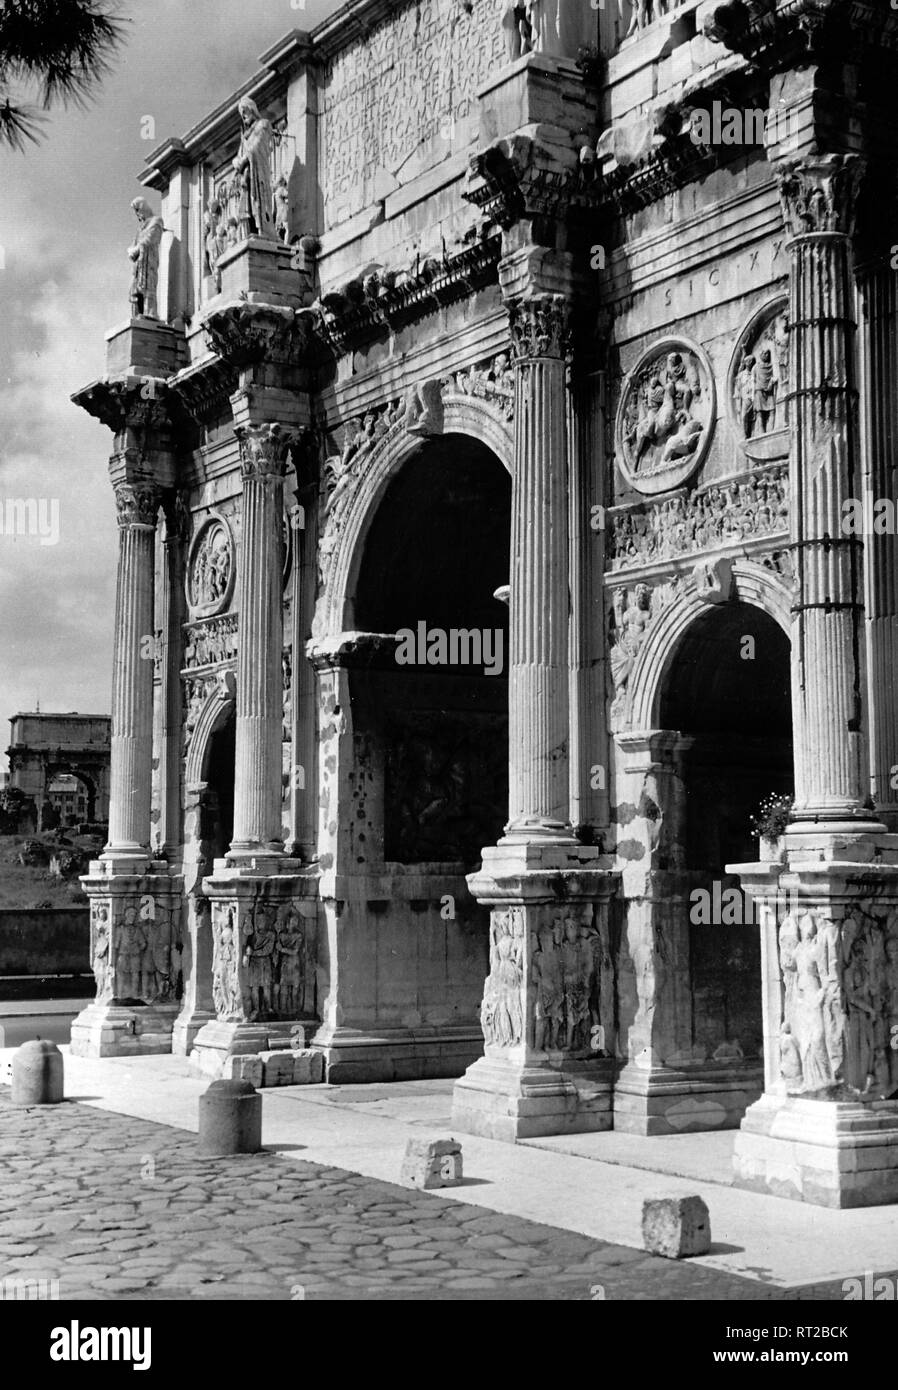 Erich Andres Italien - Erich Andres - Italy, Rome, 1950s, History, Historical, Arch of Constantine, Arco di Constantino Italien - Der Konstantinsbogen im Rom der 1950er Jahre. Stock Photo